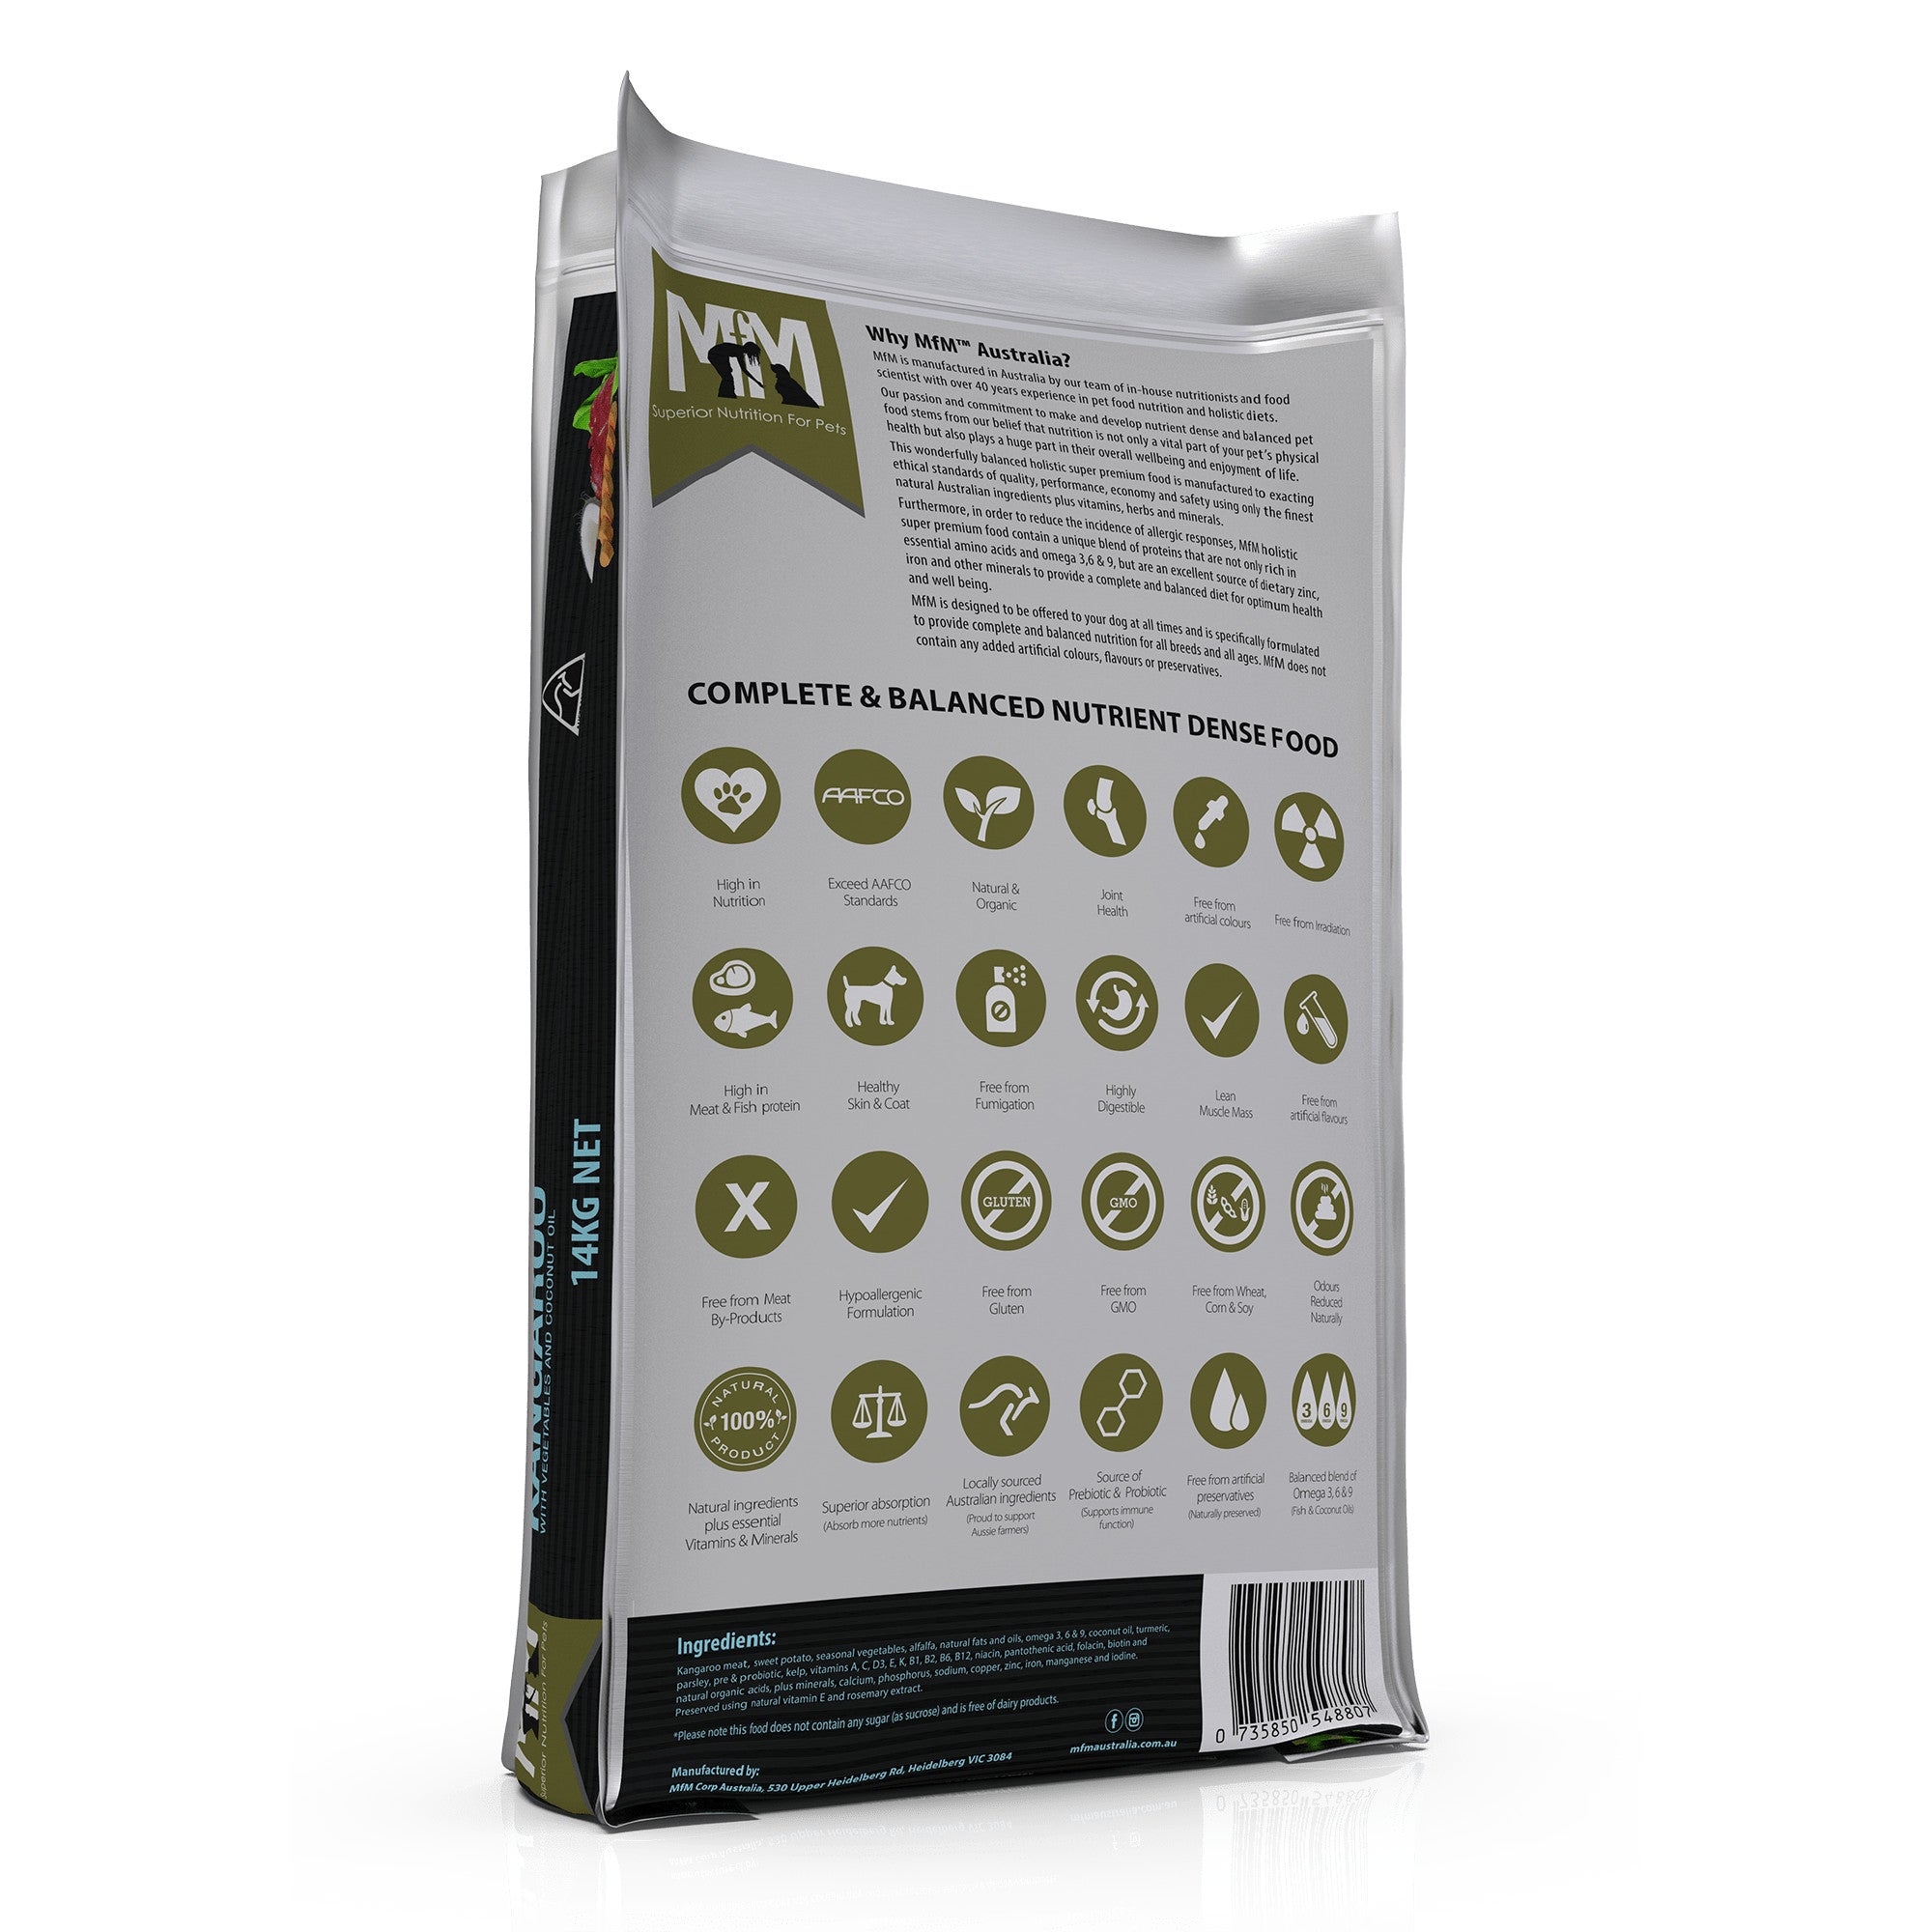 Meals for Mutts Kangaroo Single Meat Protein Dog Food - Back.